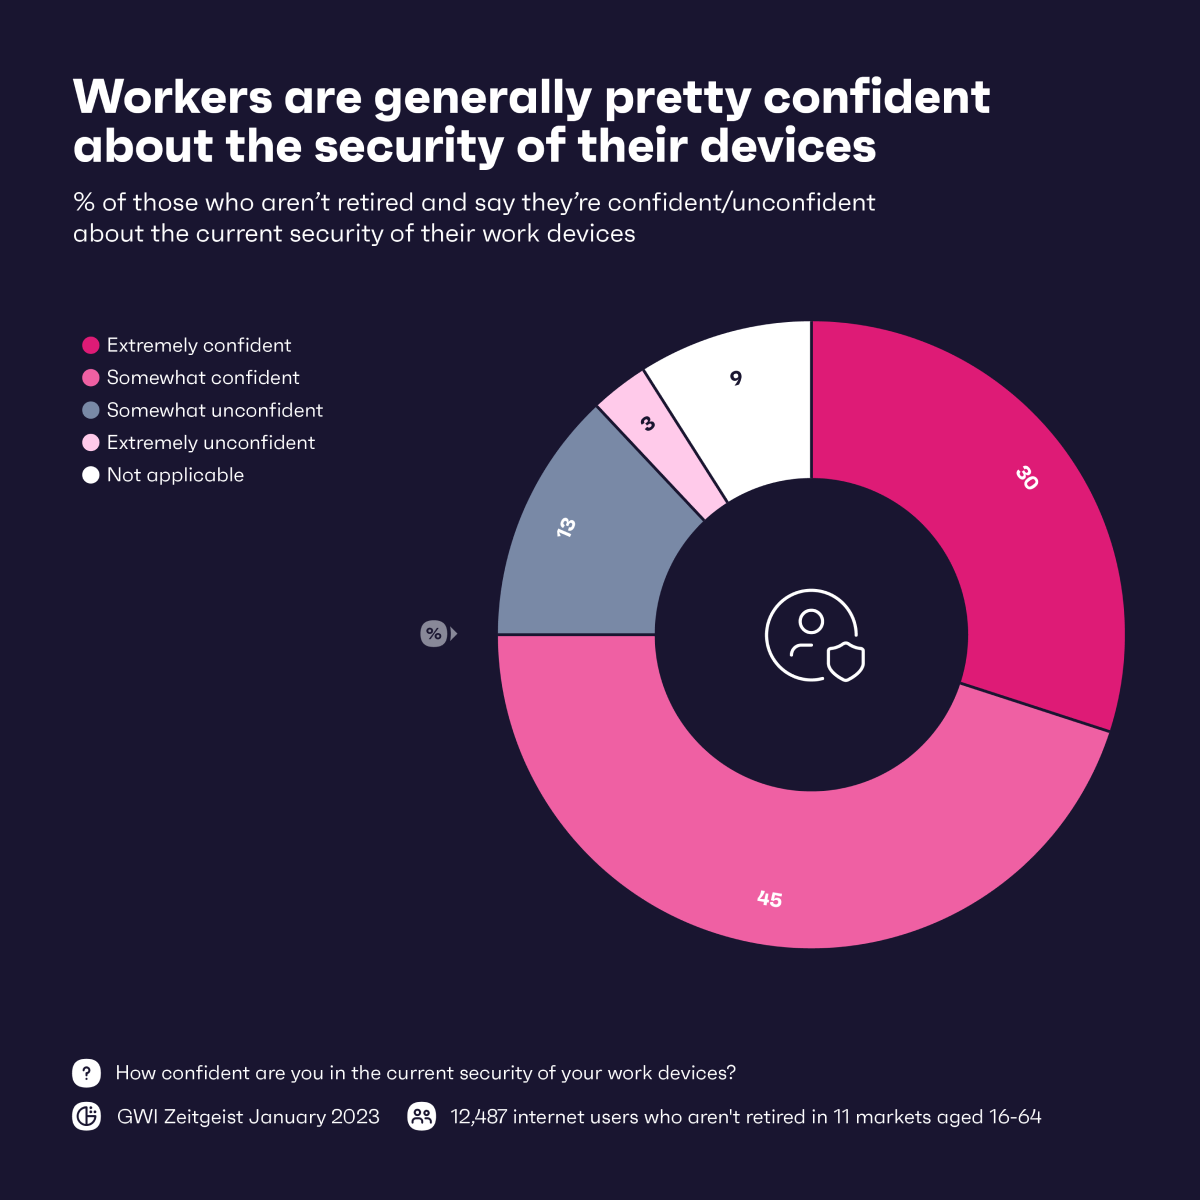 Chart showing confidence of workers in the security of their devices